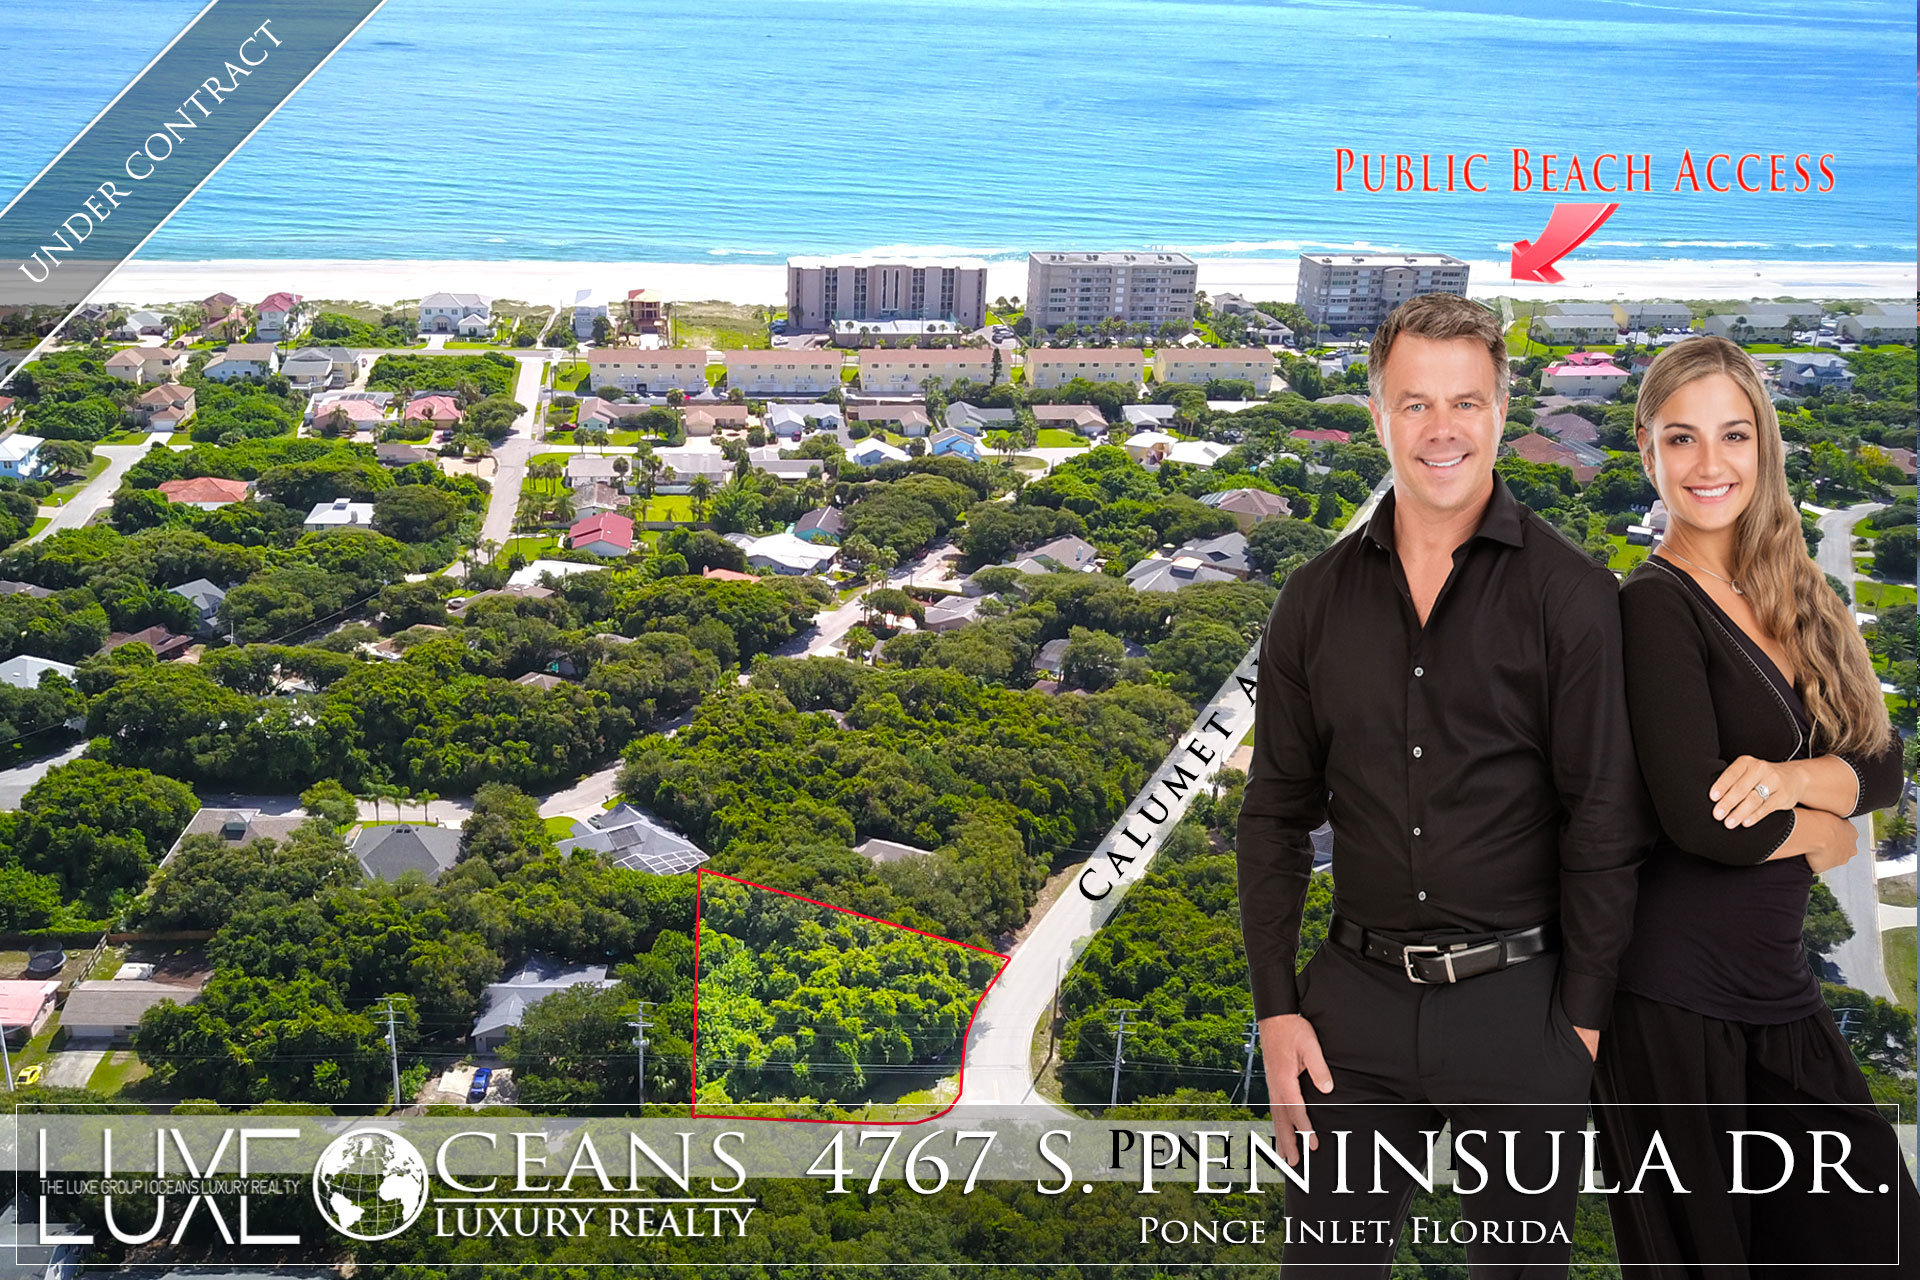 Ponce Inlet Land For Sale - Under Contract - 4767 S Peninsula Waterfront Homes For Sale